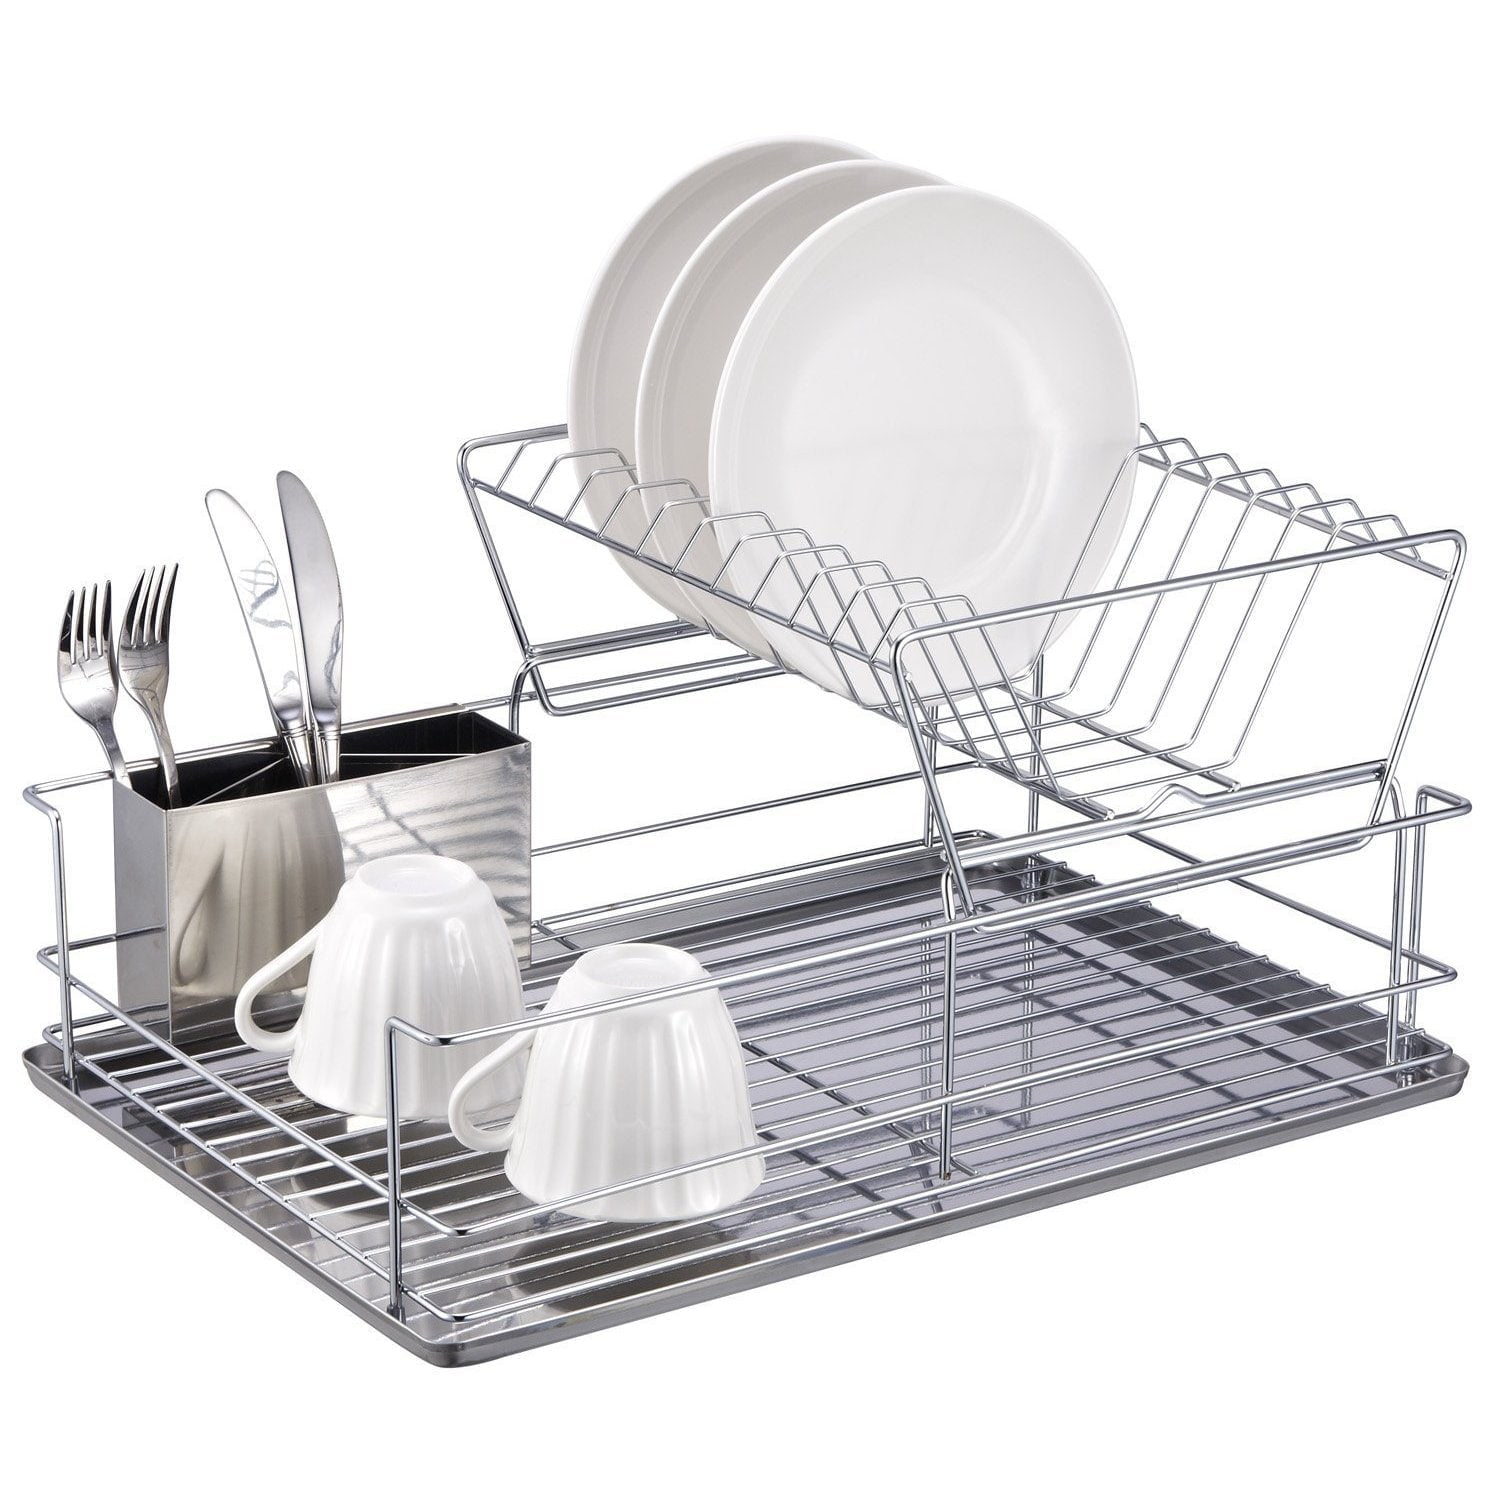 12 X 14 Stainless Steel Dish Rack